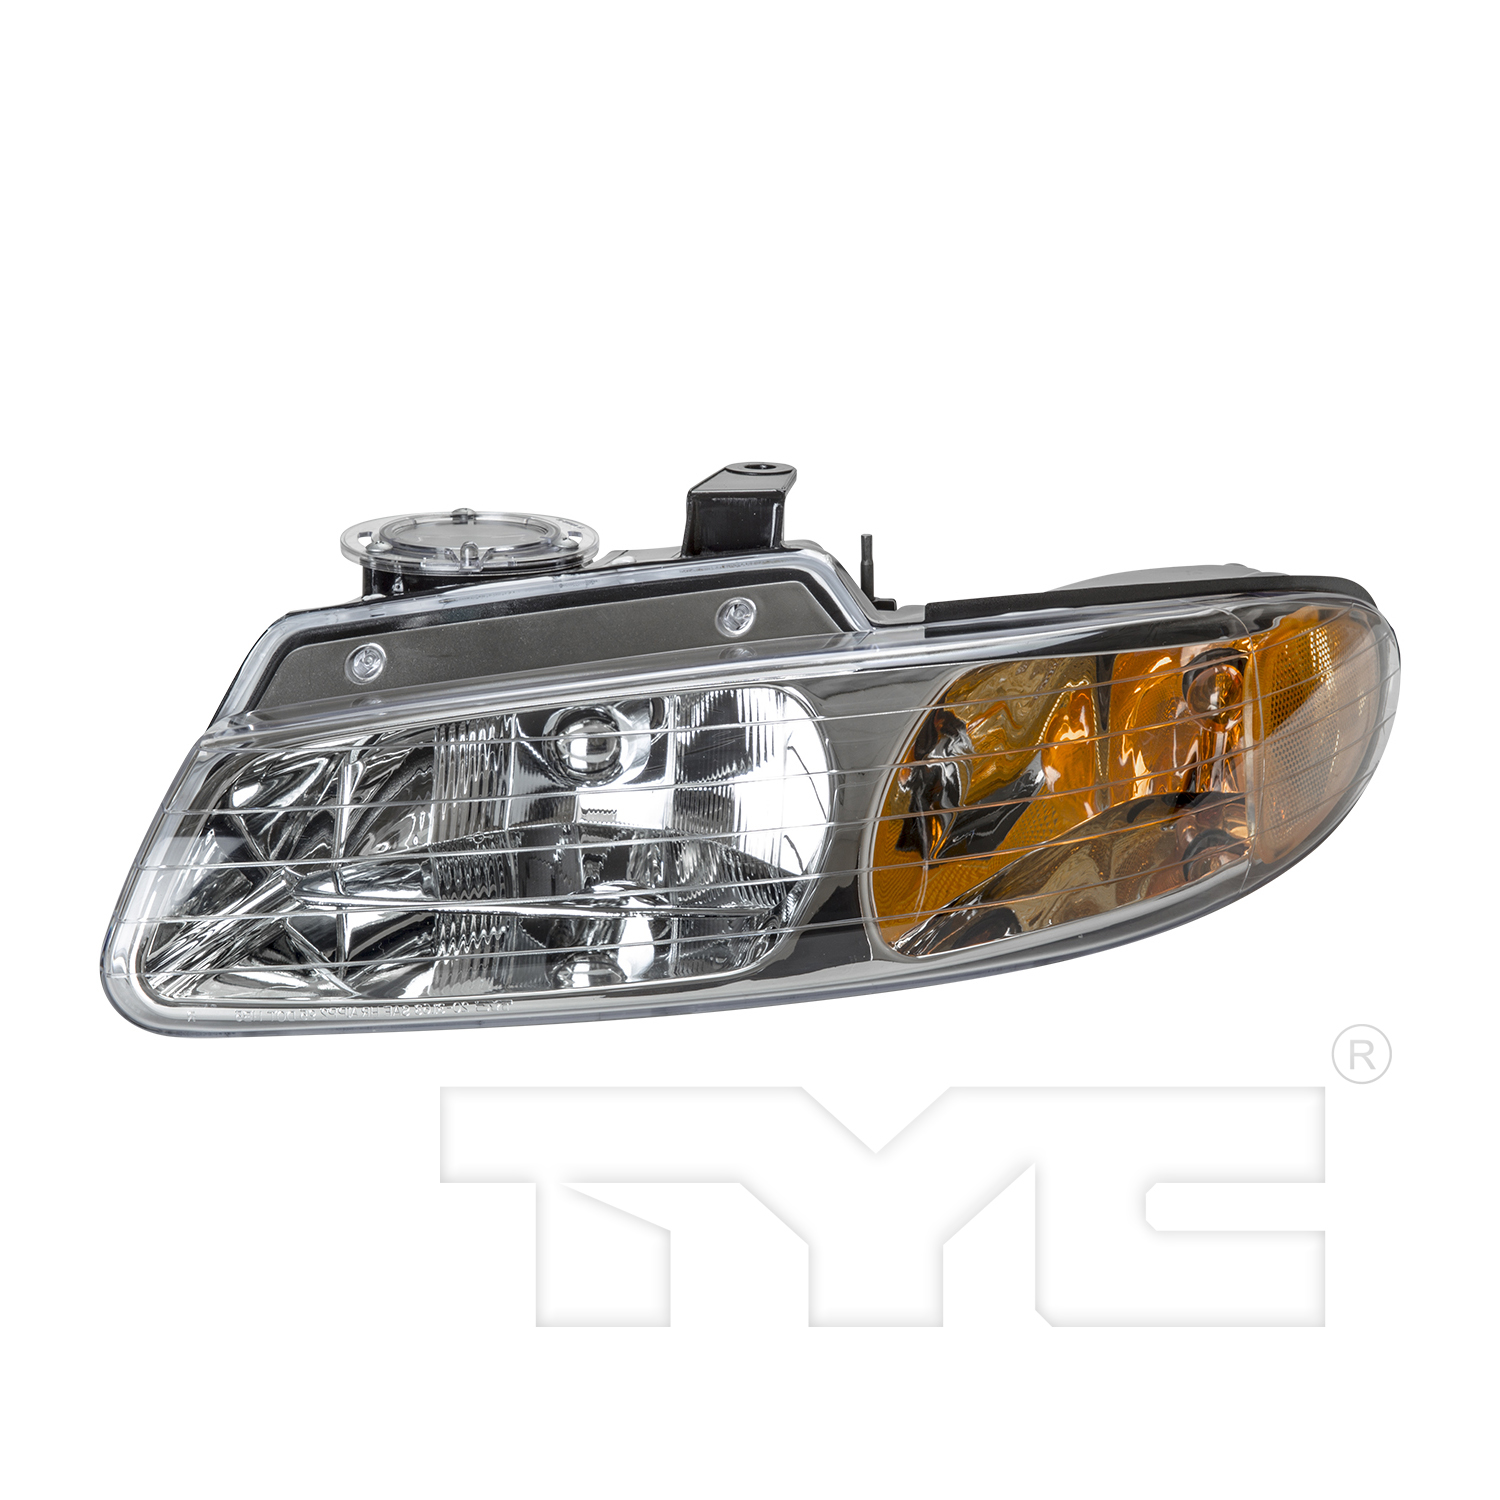 Aftermarket HEADLIGHTS for PLYMOUTH - VOYAGER, VOYAGER,96-99,LT Headlamp assy composite